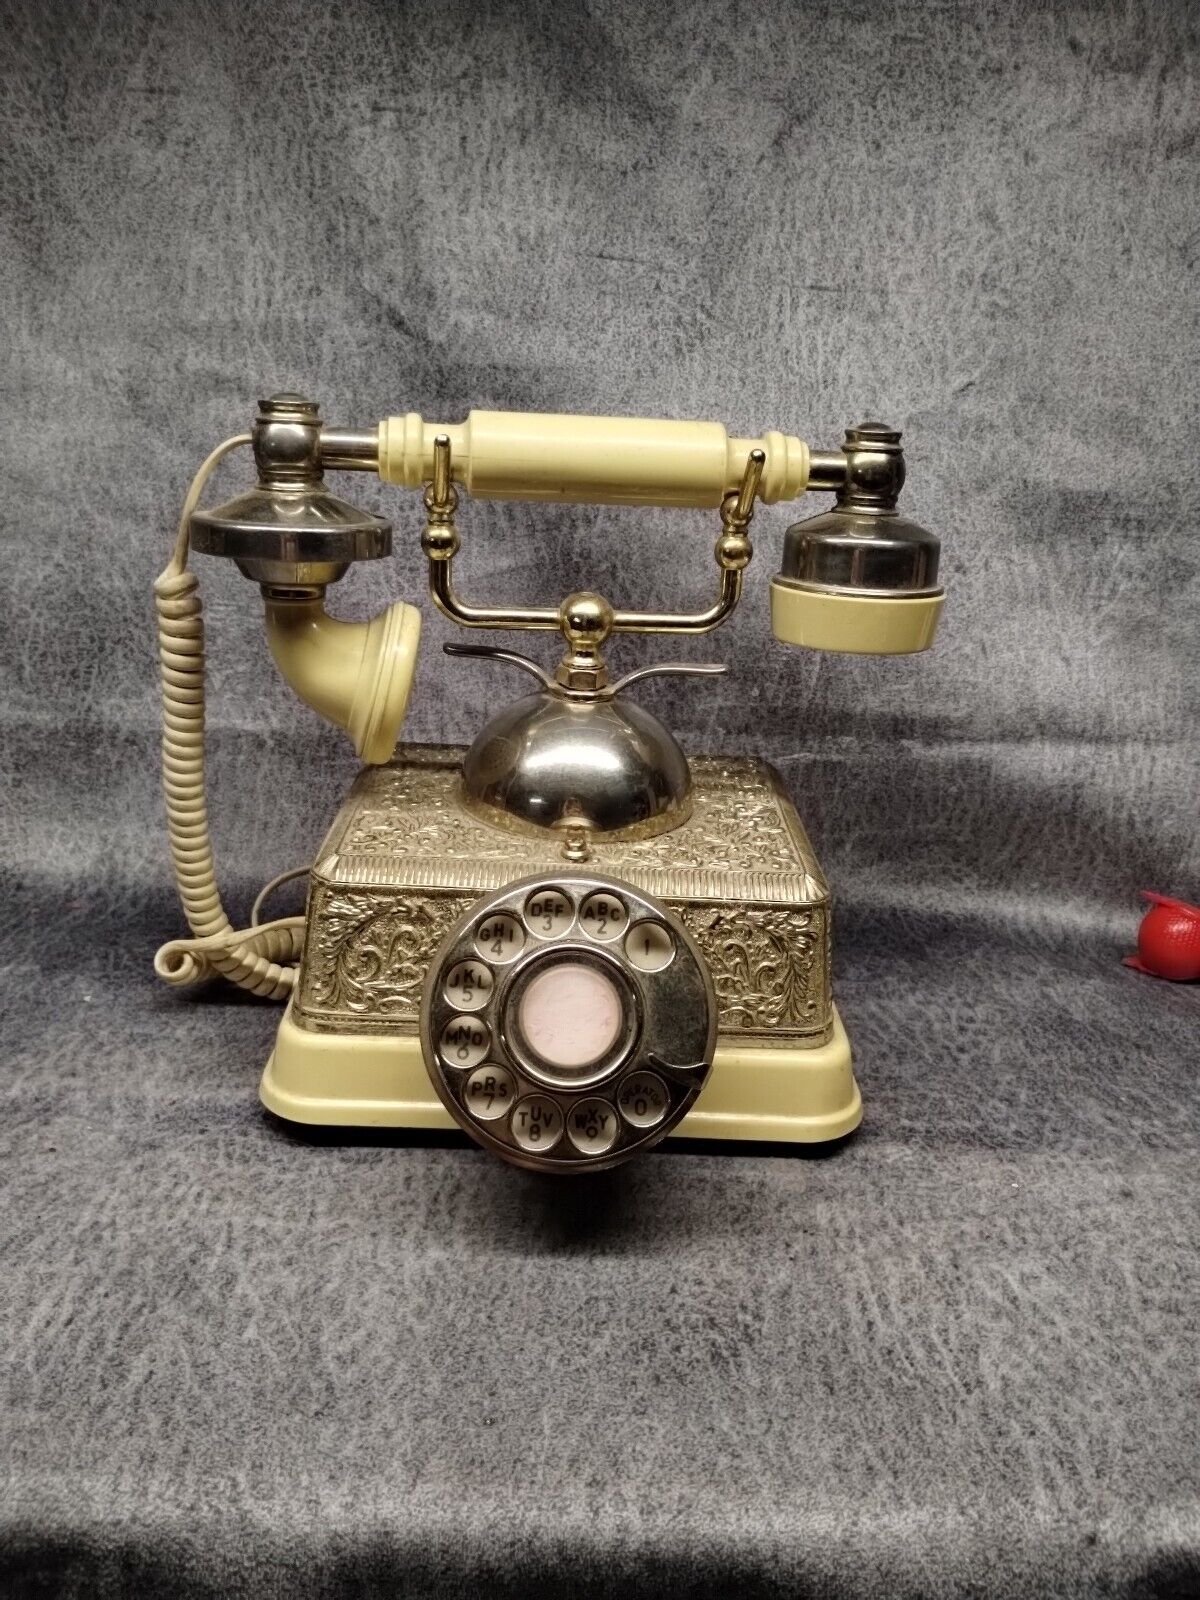 VTG French Continent Style Rotary Dial Novelty Phone Gold/Brass from Radio Shack